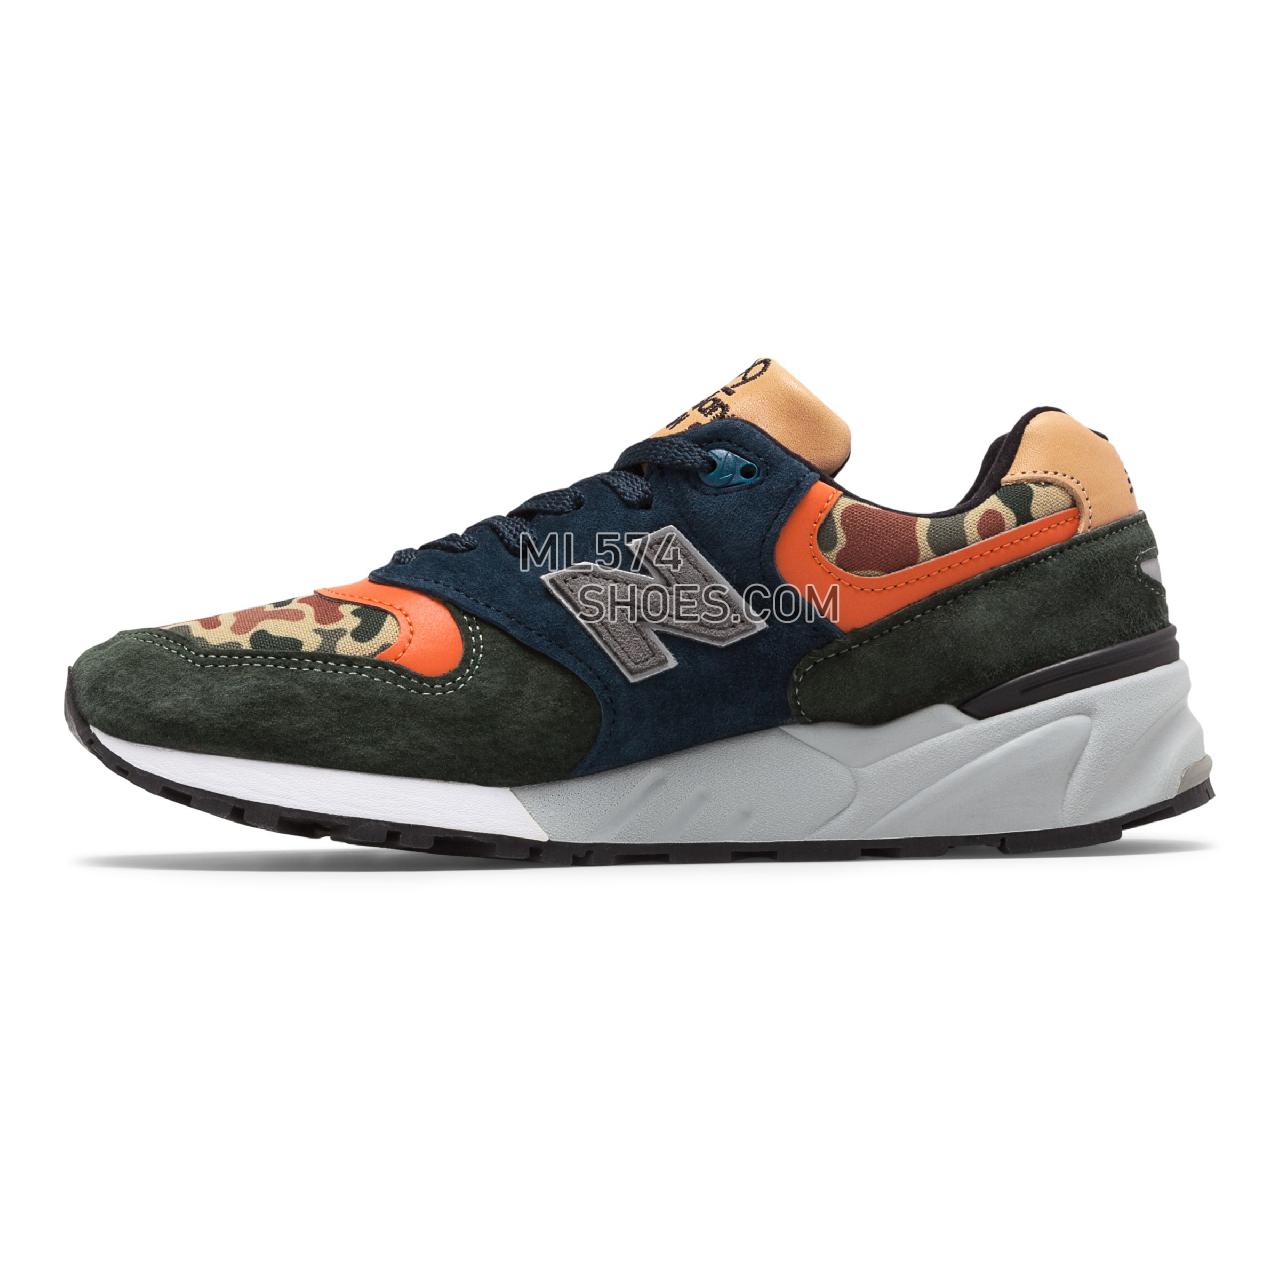 New Balance 999 Made in US - Men's 999 - Classic Green with Blue - M999NI